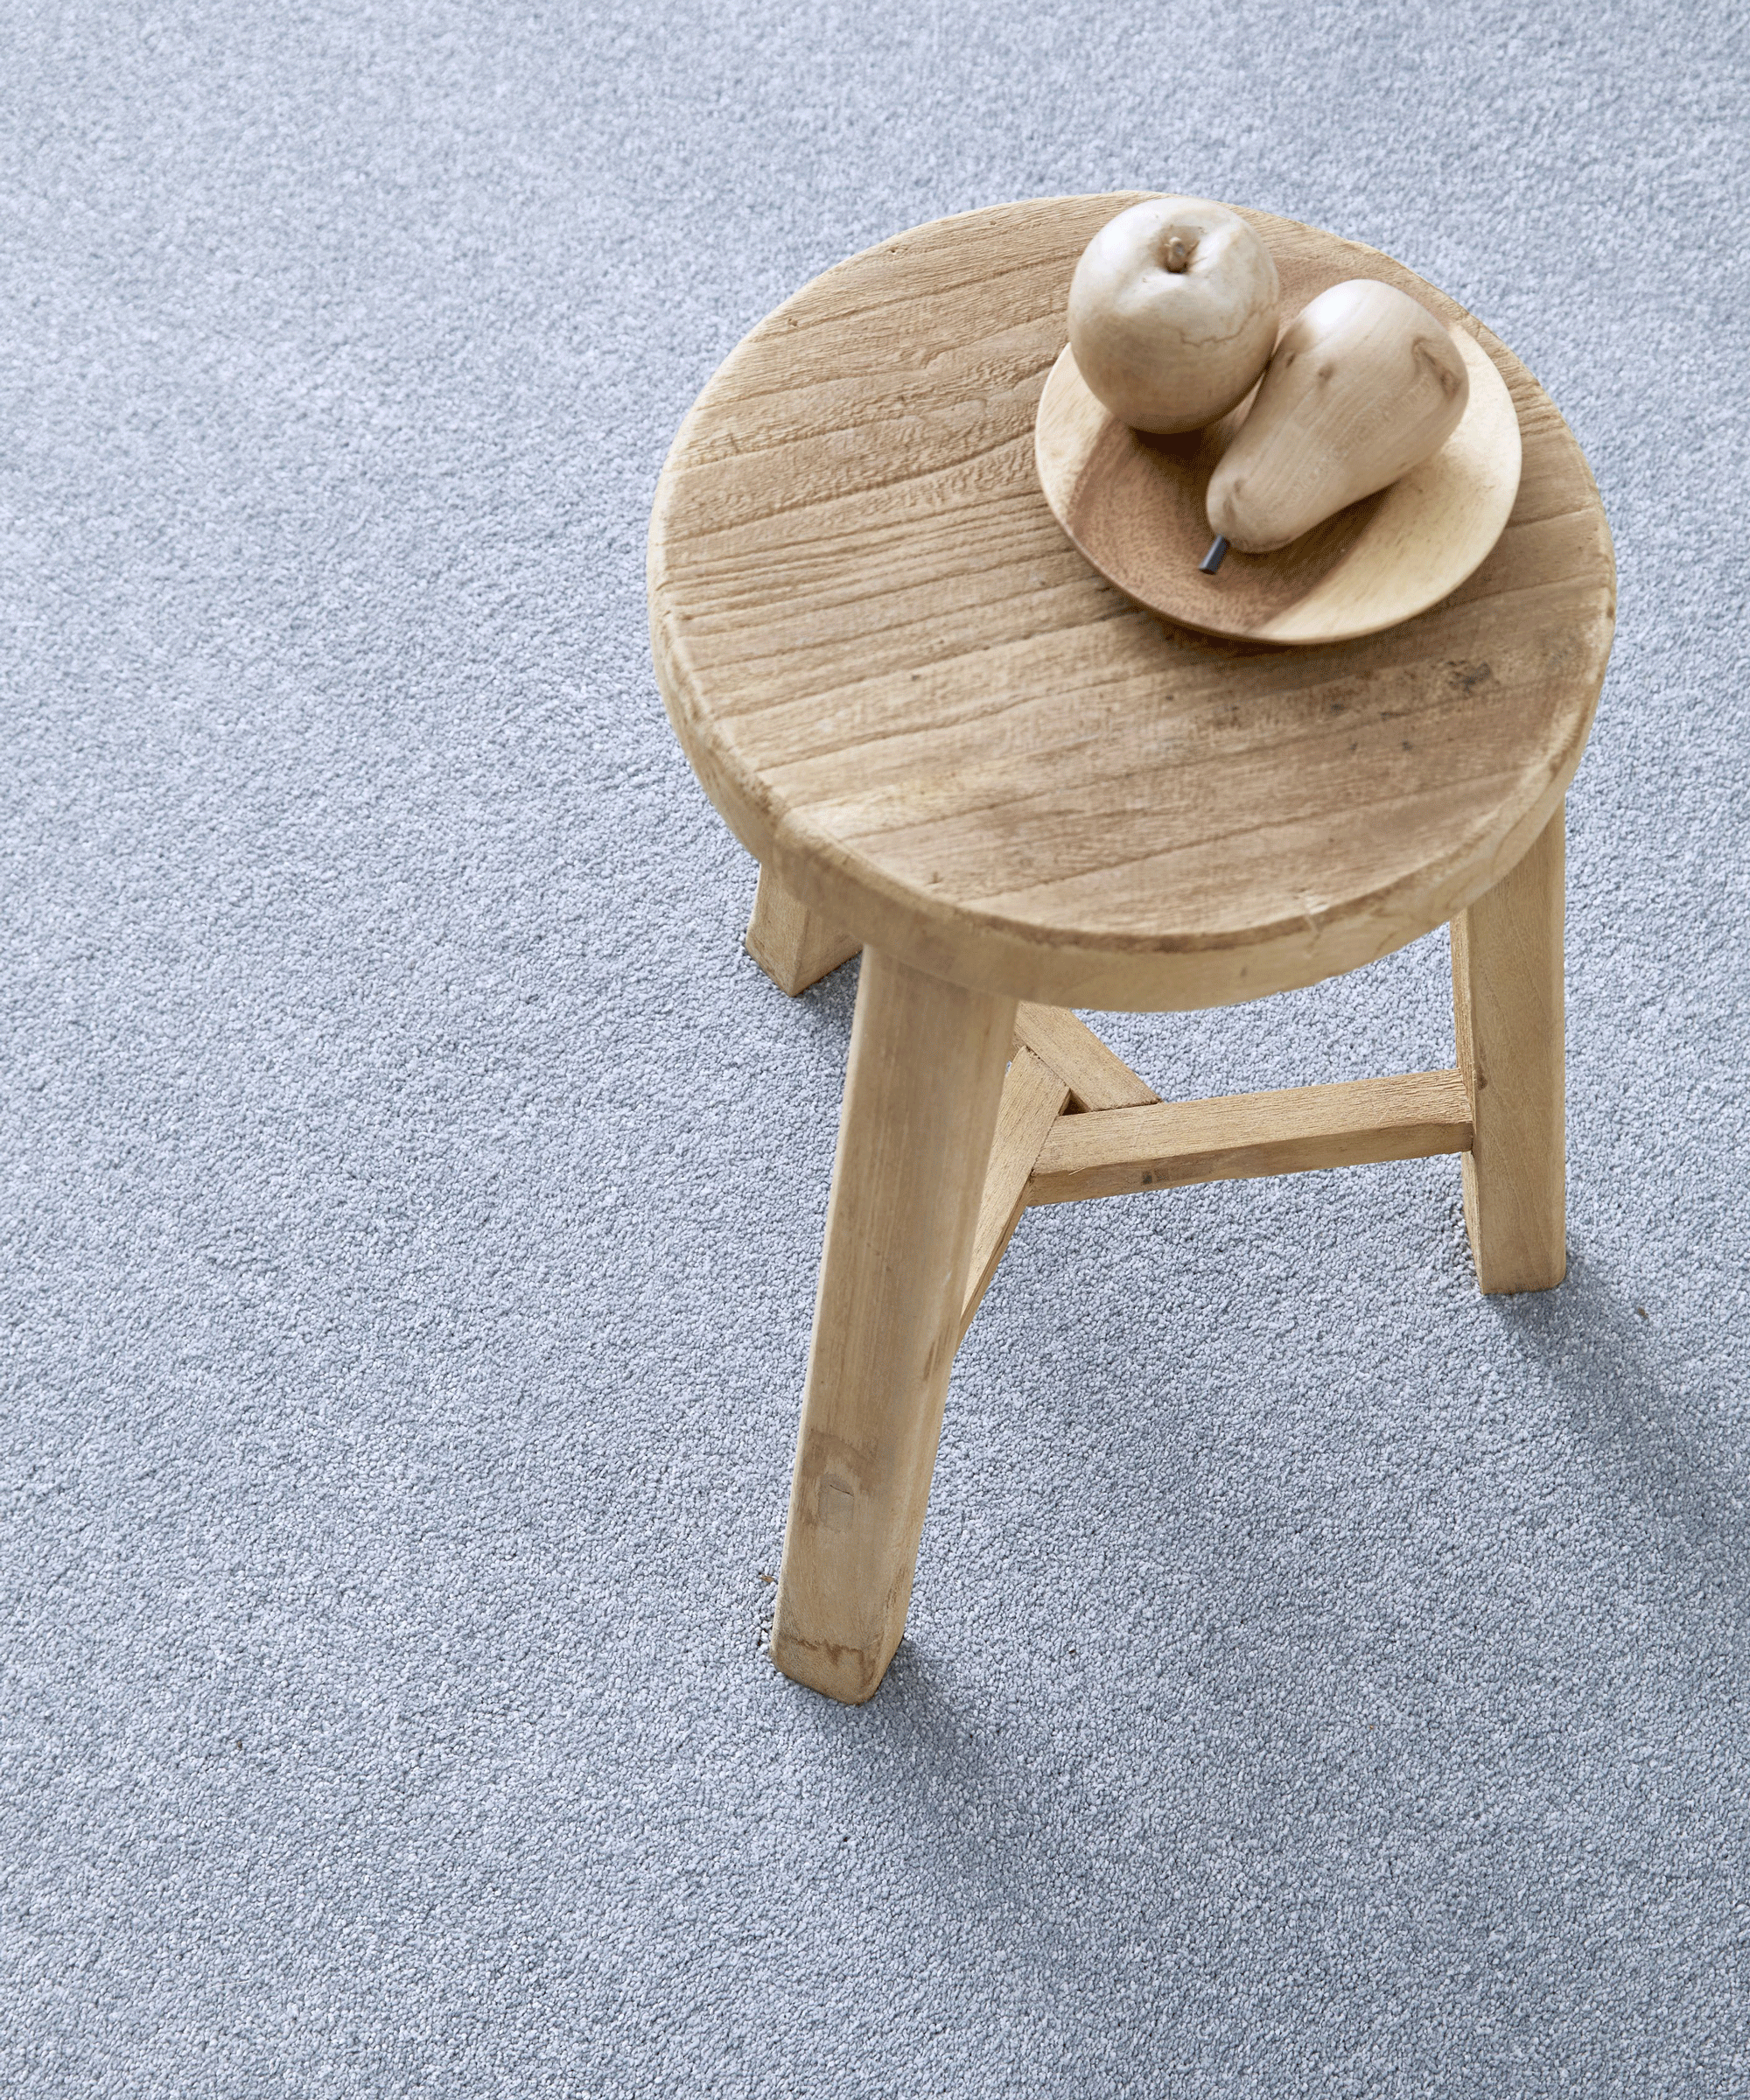 grey carpet and wooden stool